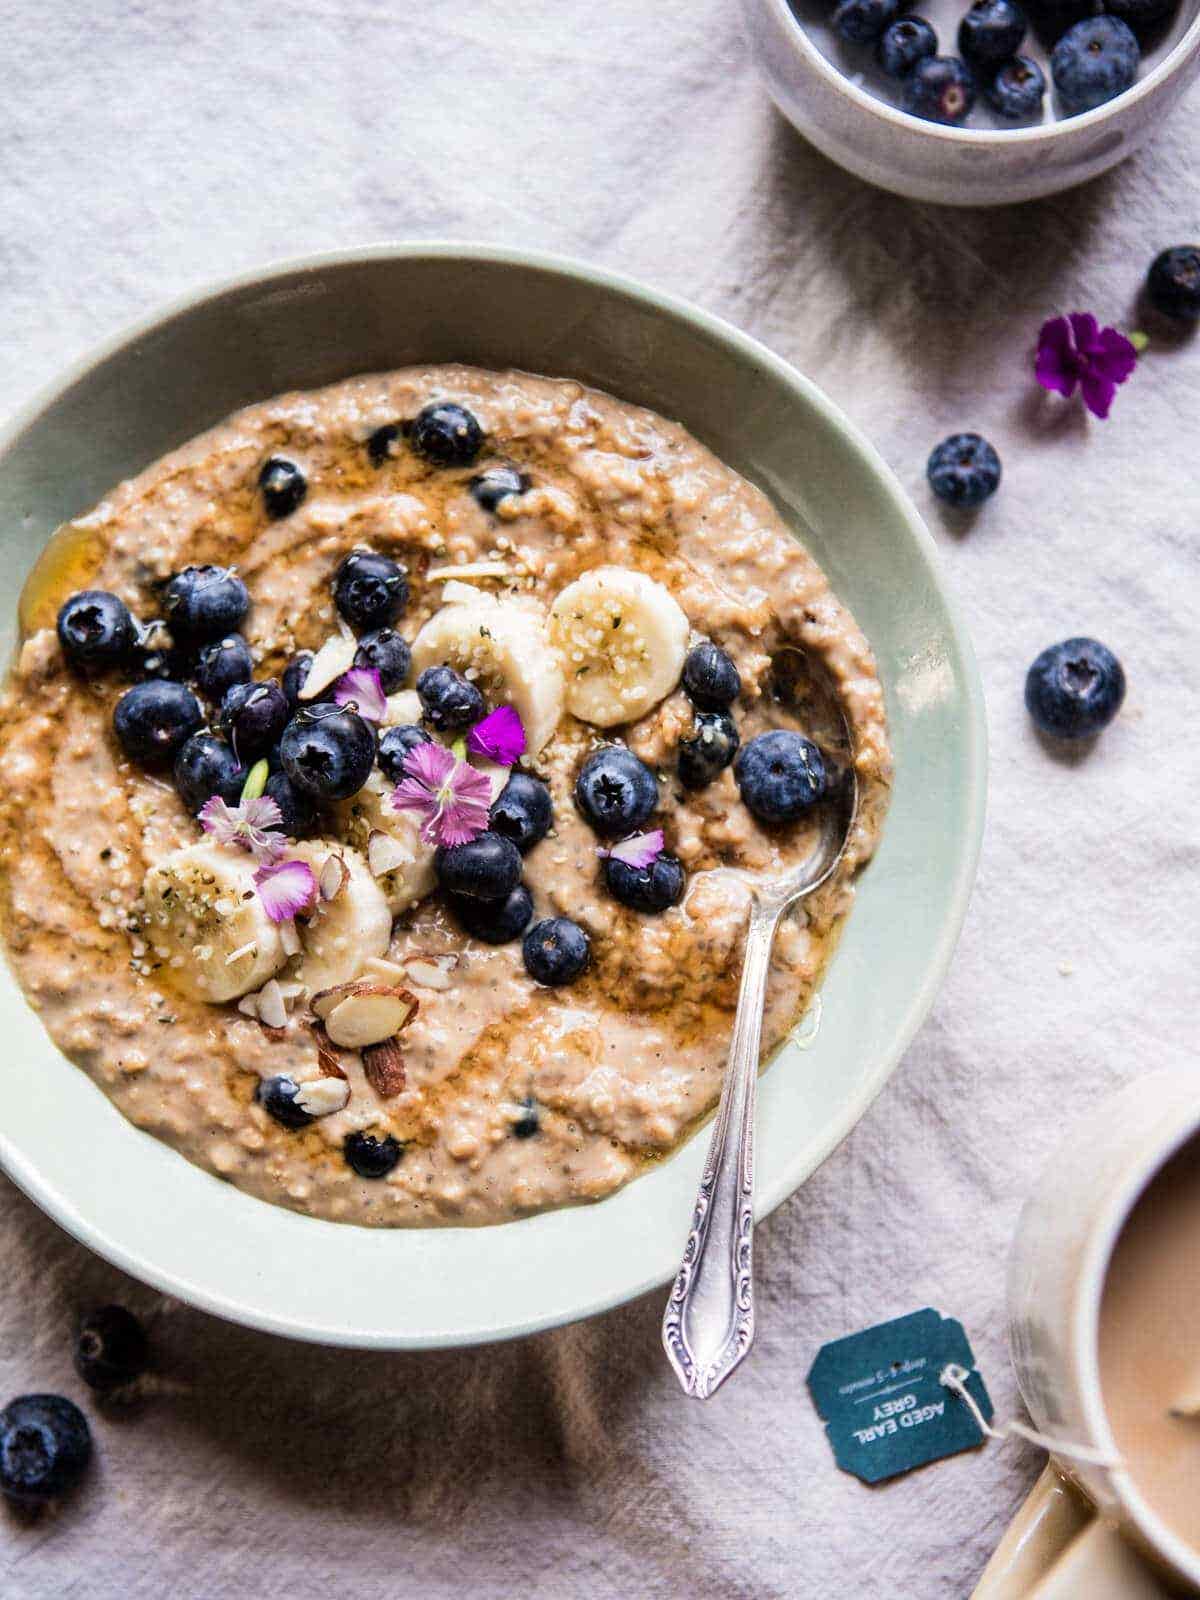 I’ll Admit I Used to Think Oatmeal Was Boring, But Then I Tried These Recipes